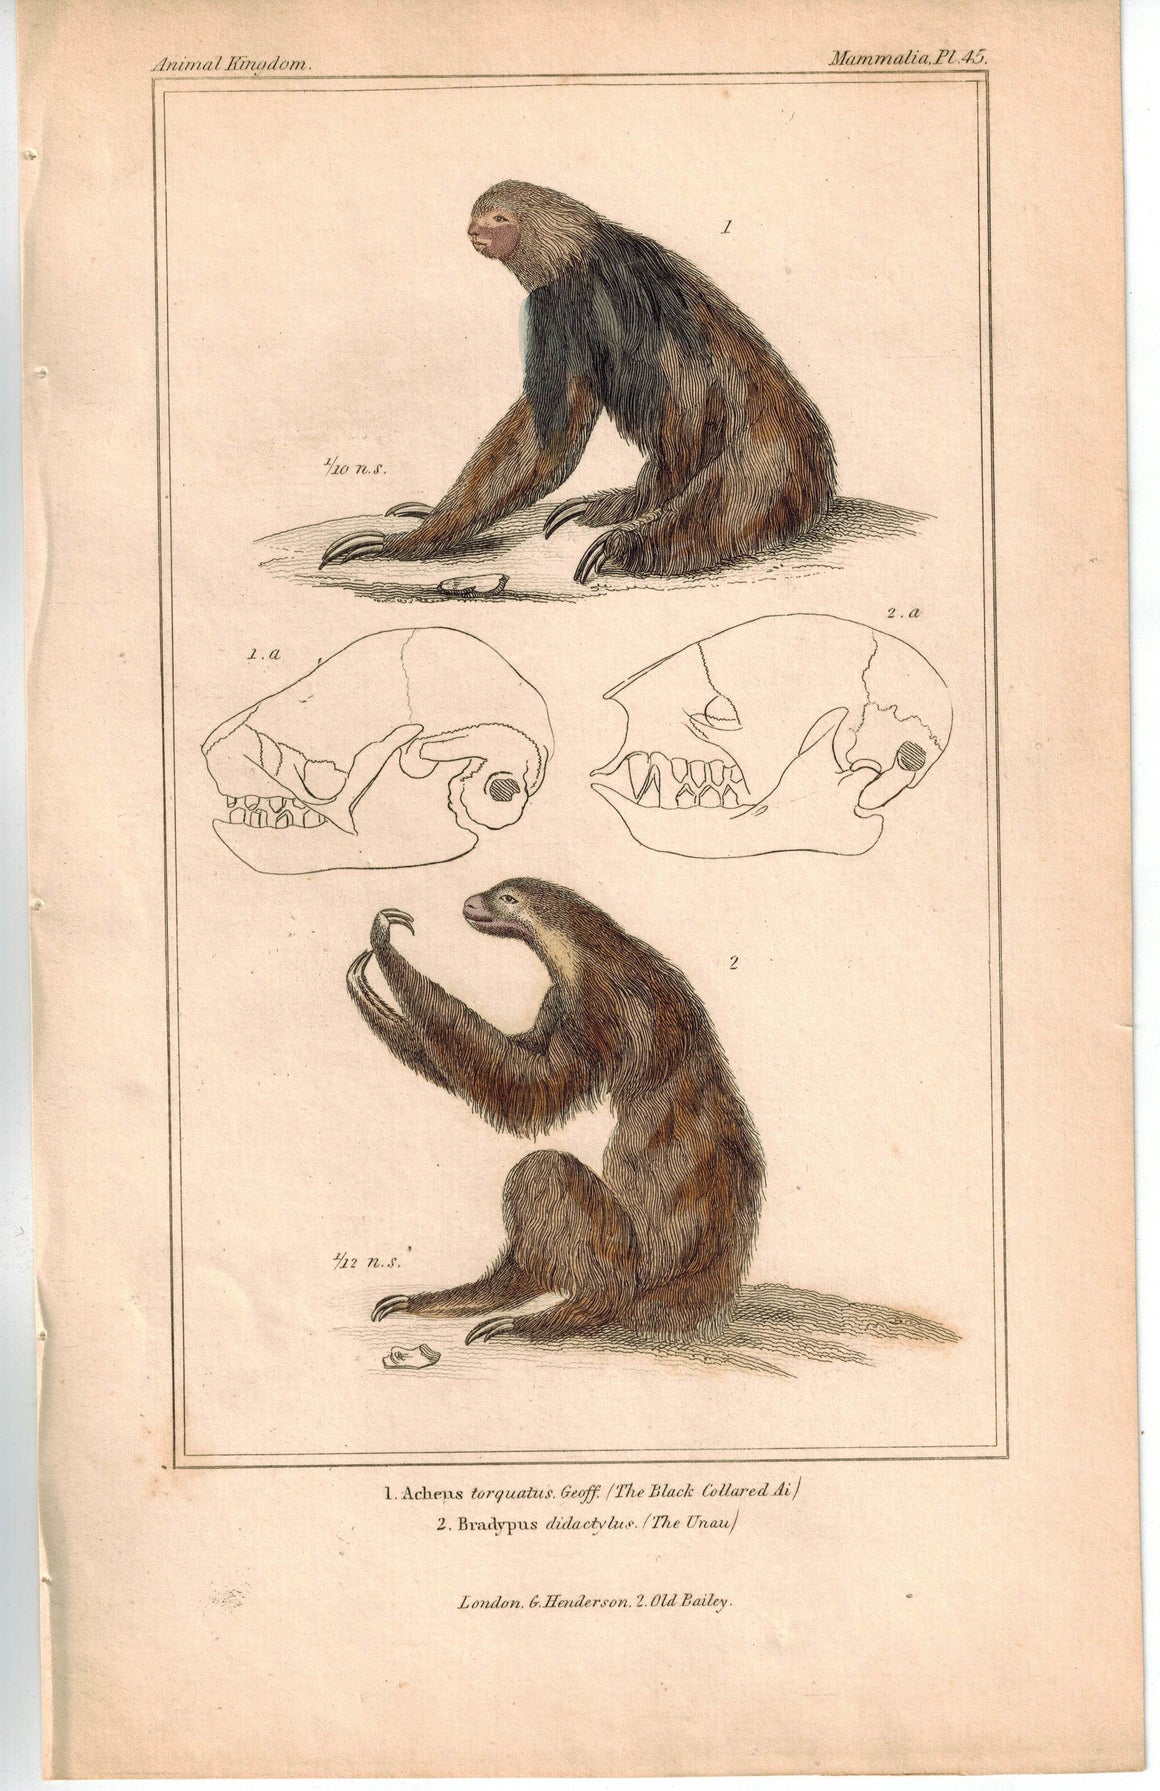 Two and Three Toed Sloth - Black Collared Ai & The Unau 1837 Cuvier Print